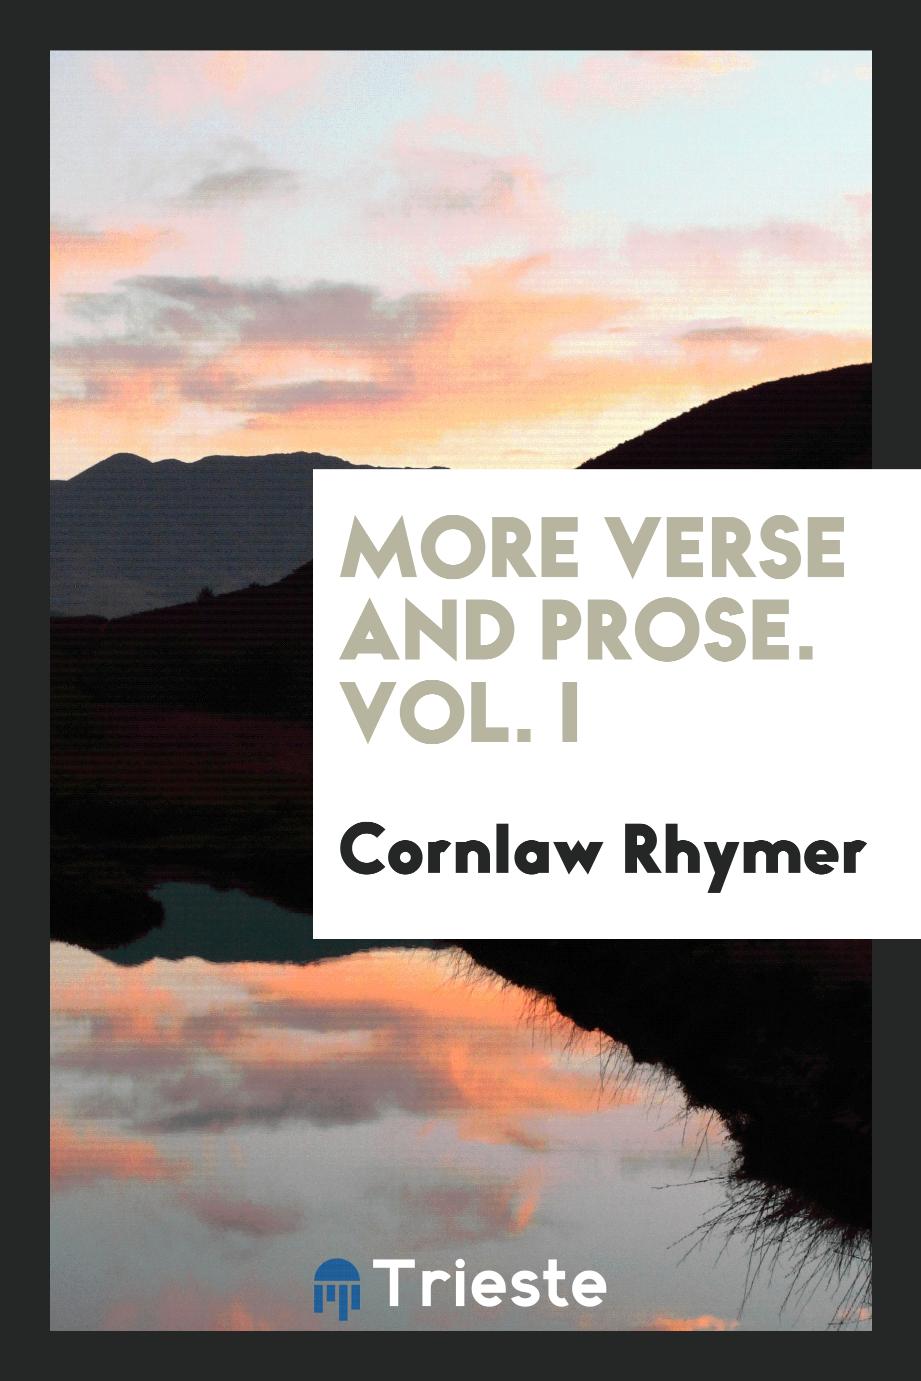 More verse and prose. Vol. I